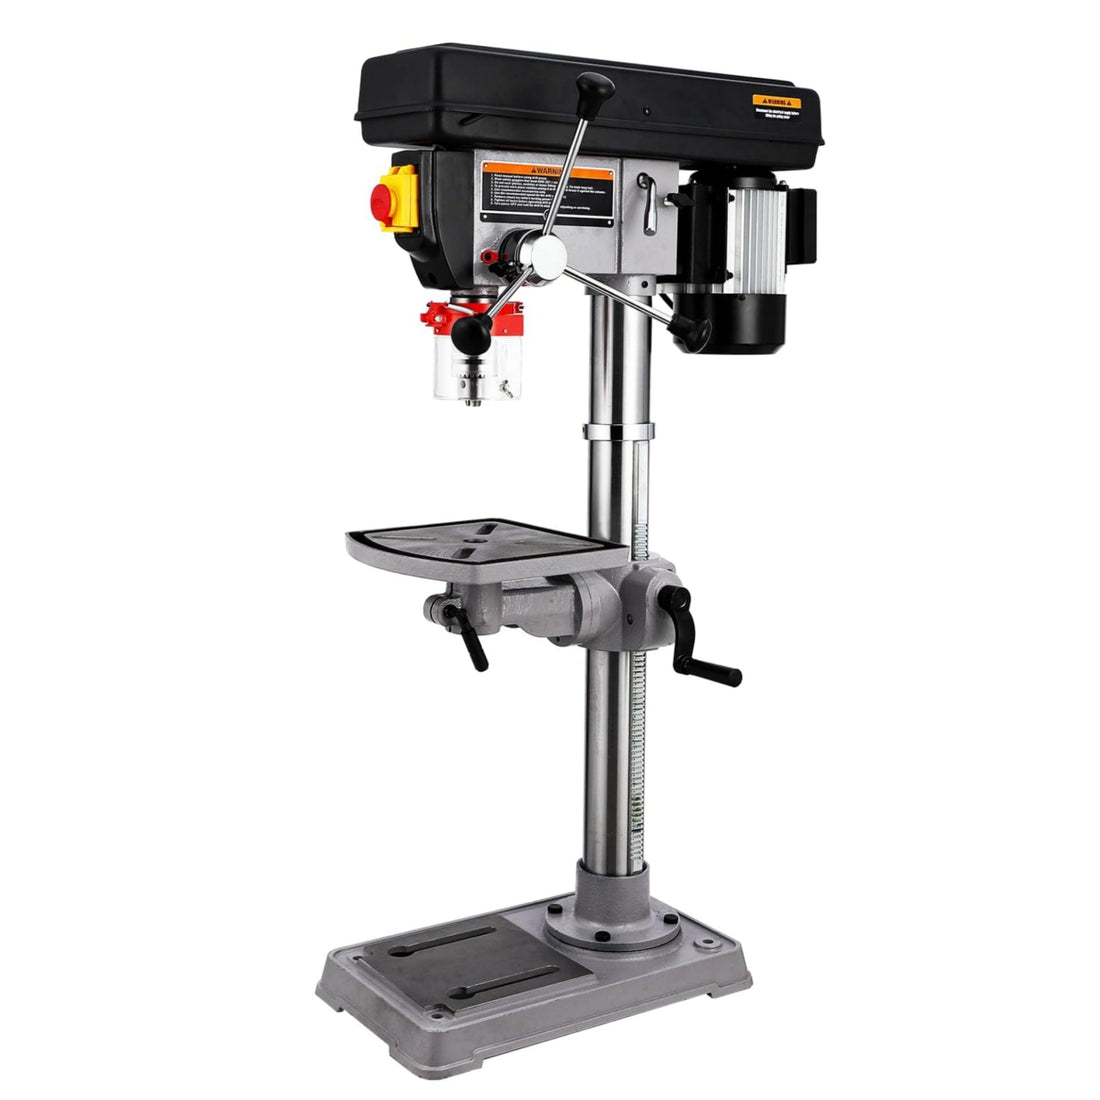 13 Inch 7.5 Amp Drill Press, 288-3084 RPM, Adjustable Table